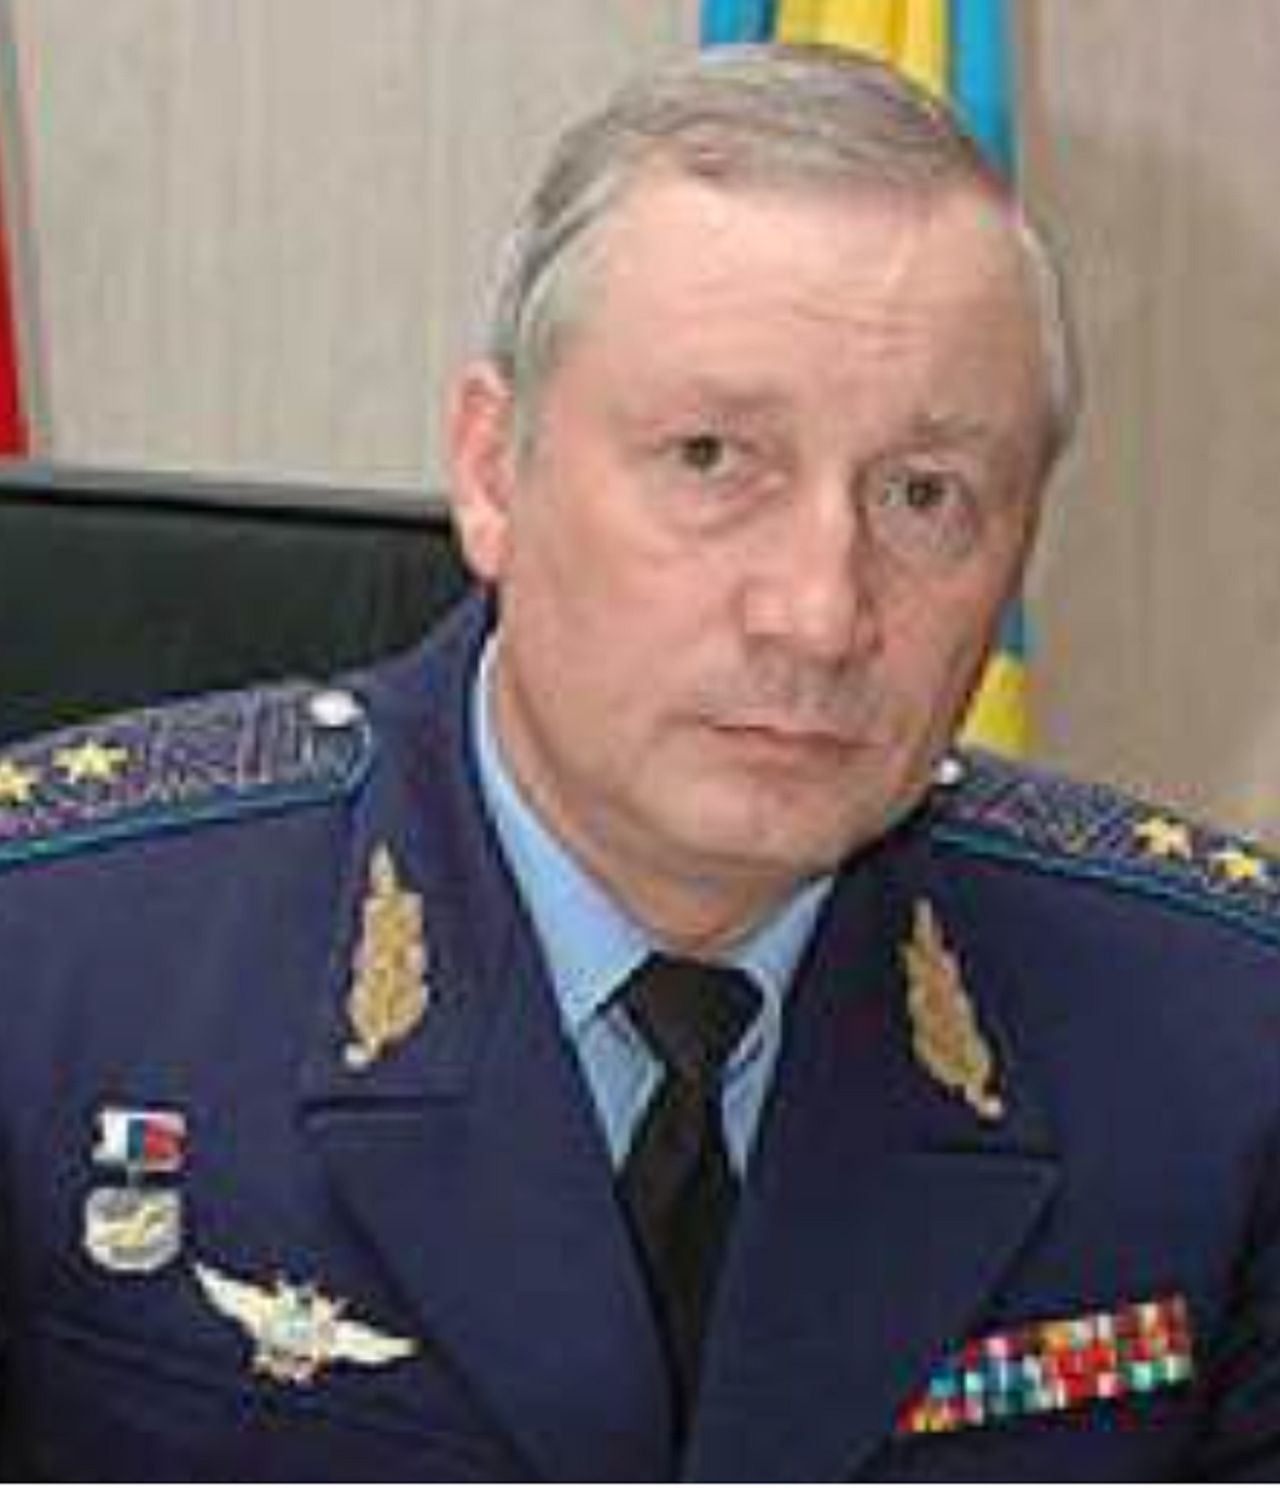 The Russian commander is dead. "The exact cause of death has not been determined."